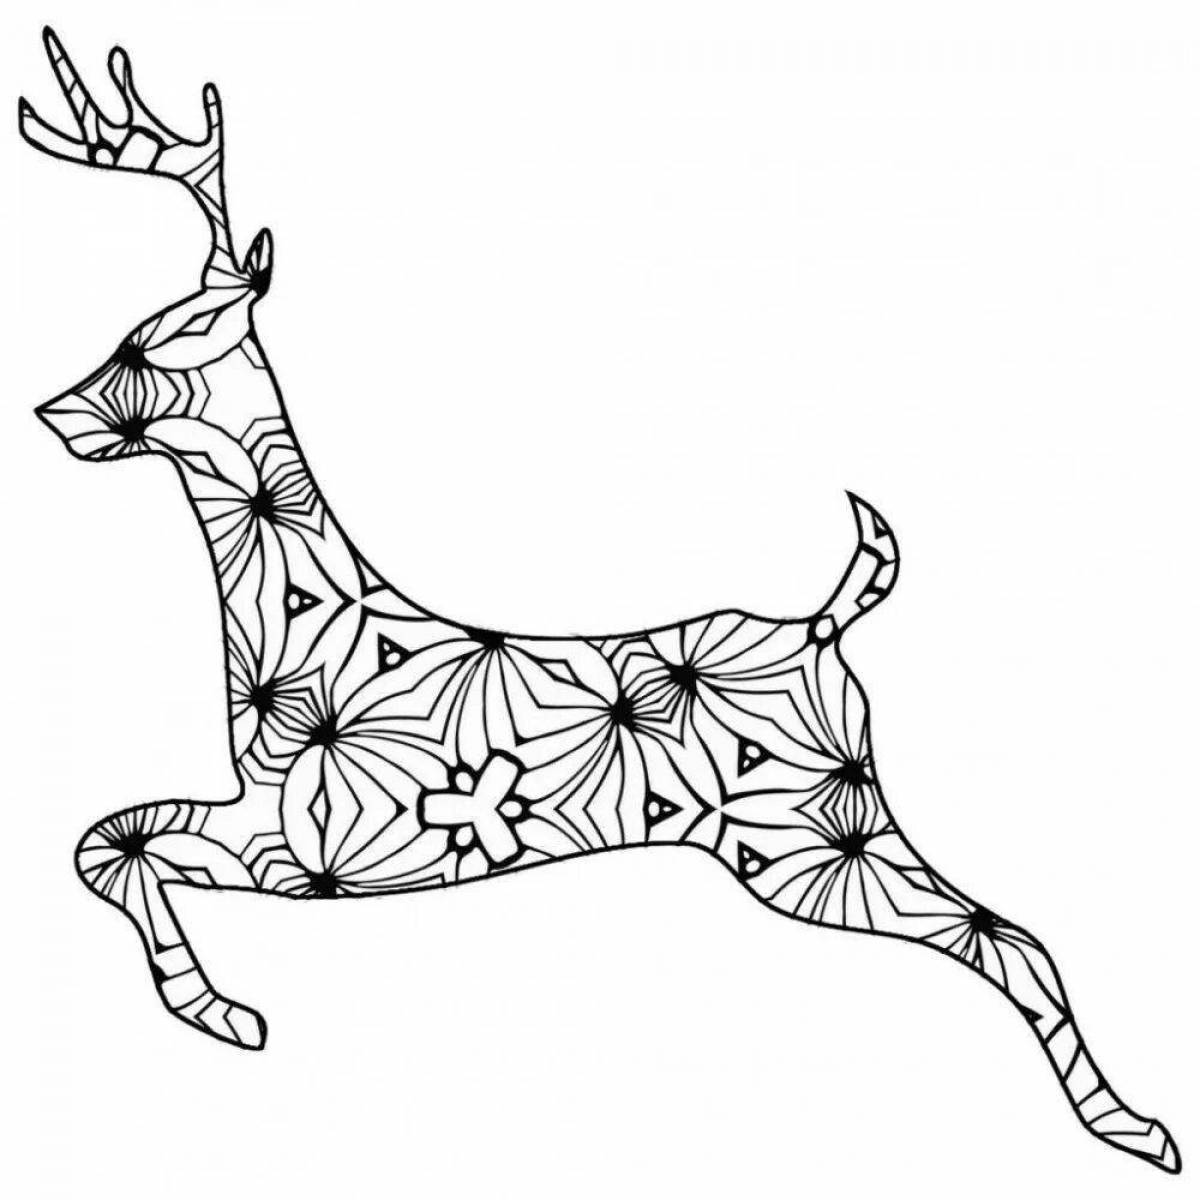 Adorable deer coloring book for girls